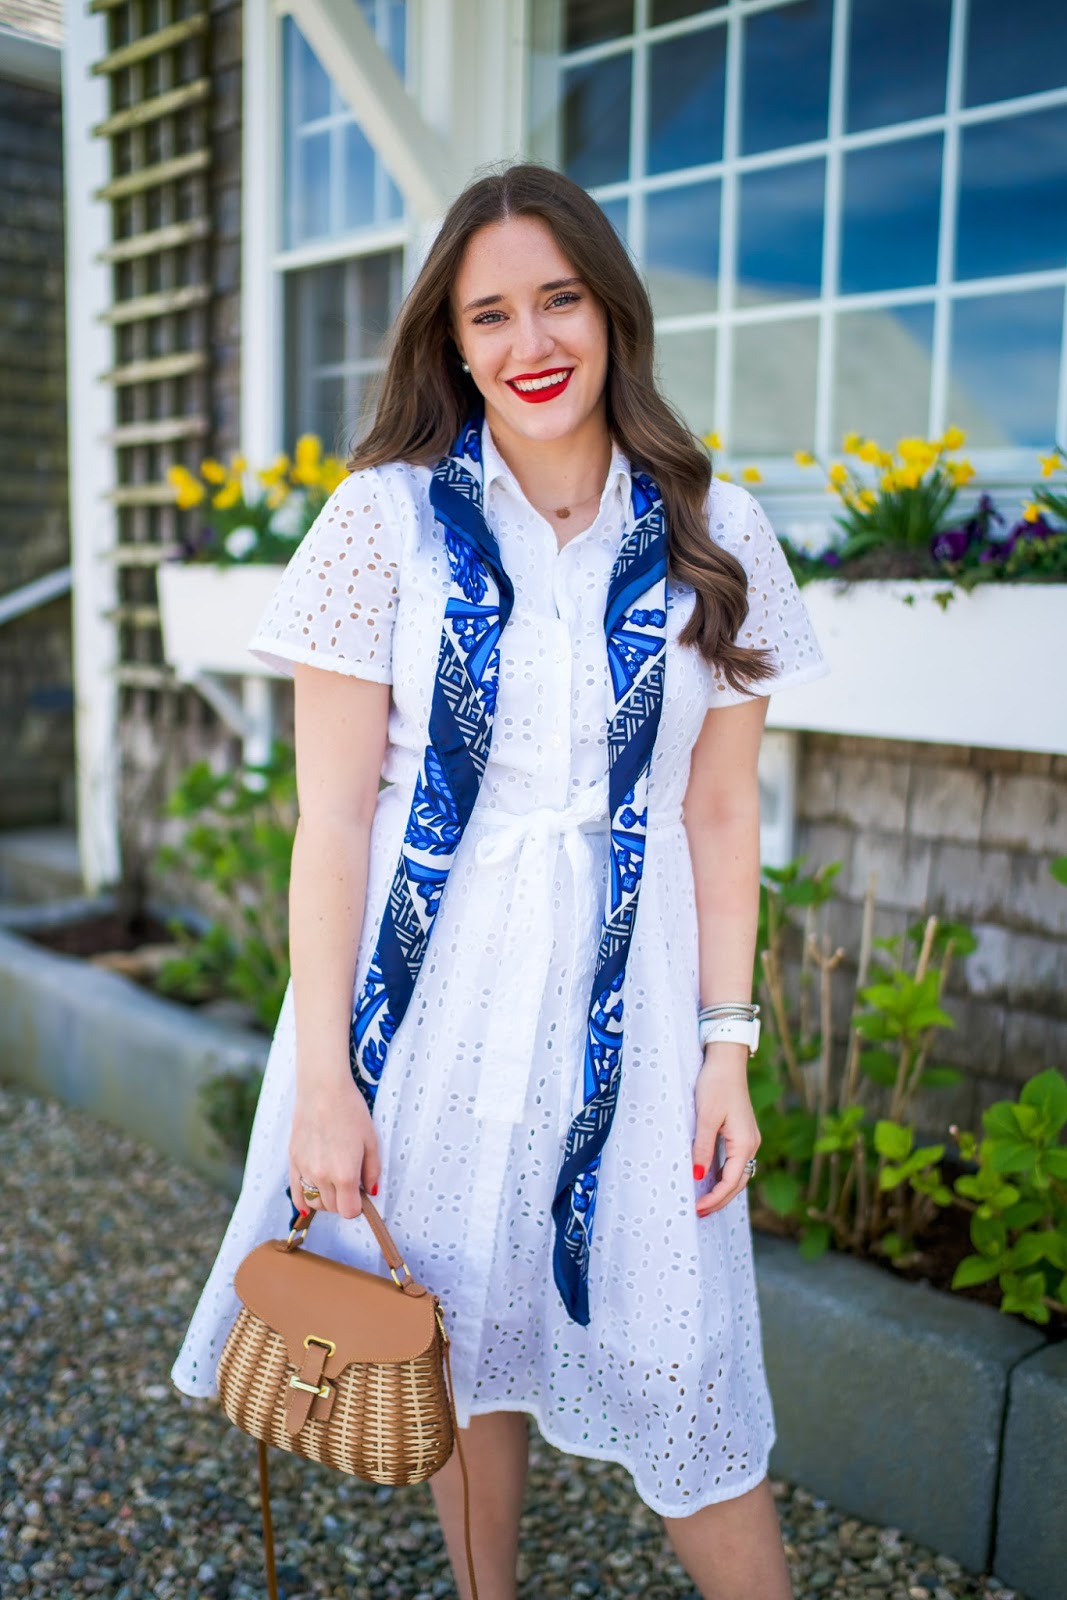 White Shirtdress styled by popular New York fashion blogger, Covering the Bases